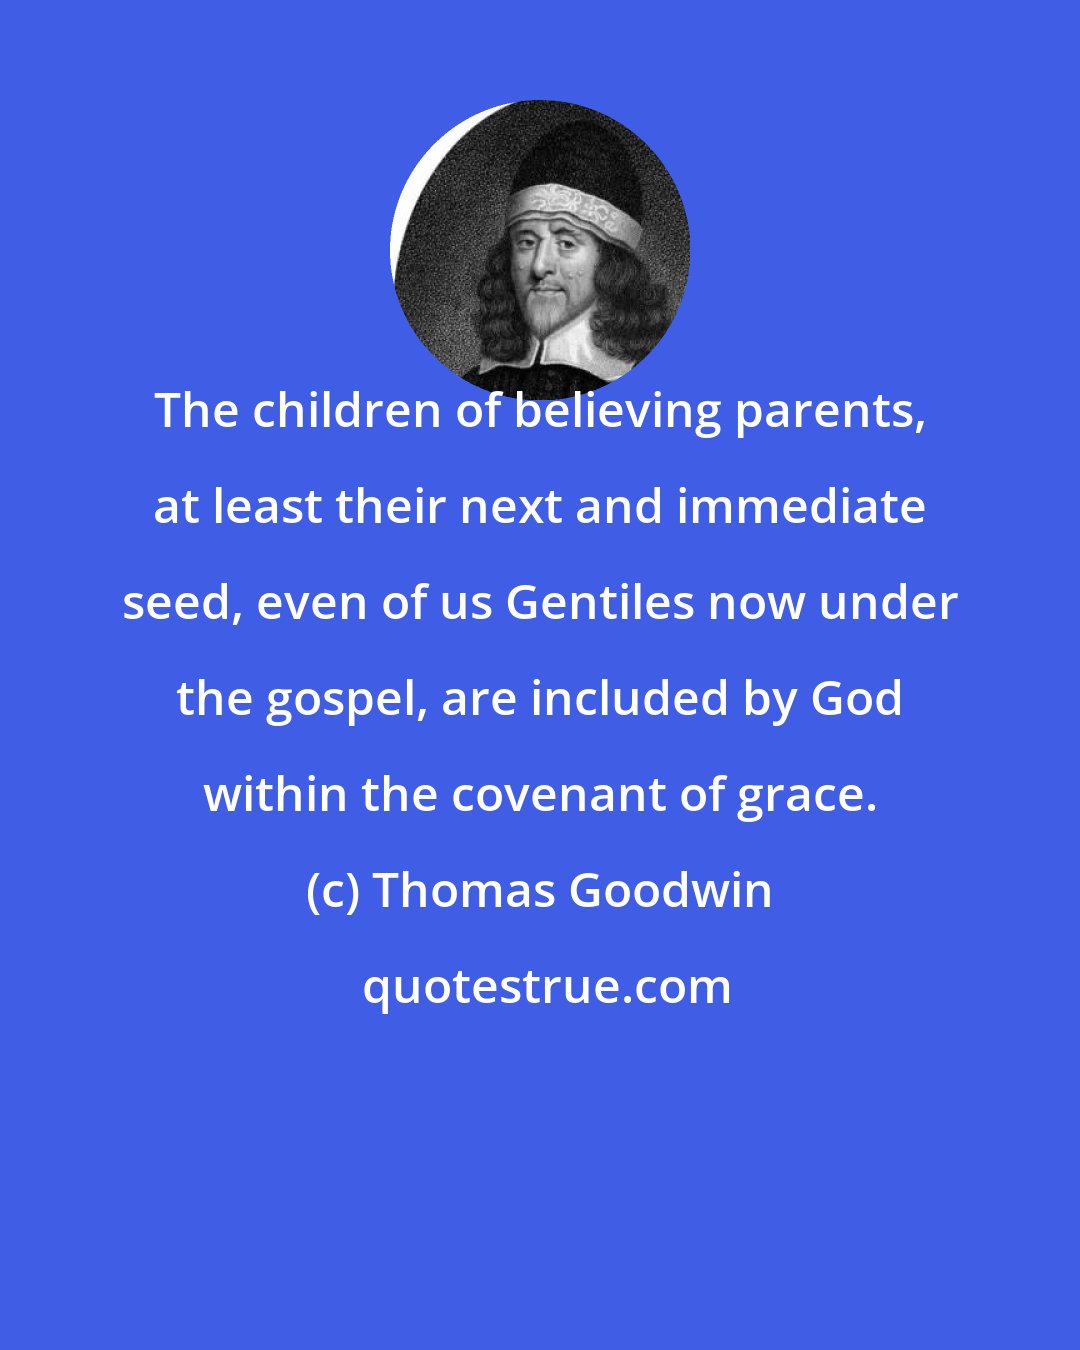 Thomas Goodwin: The children of believing parents, at least their next and immediate seed, even of us Gentiles now under the gospel, are included by God within the covenant of grace.